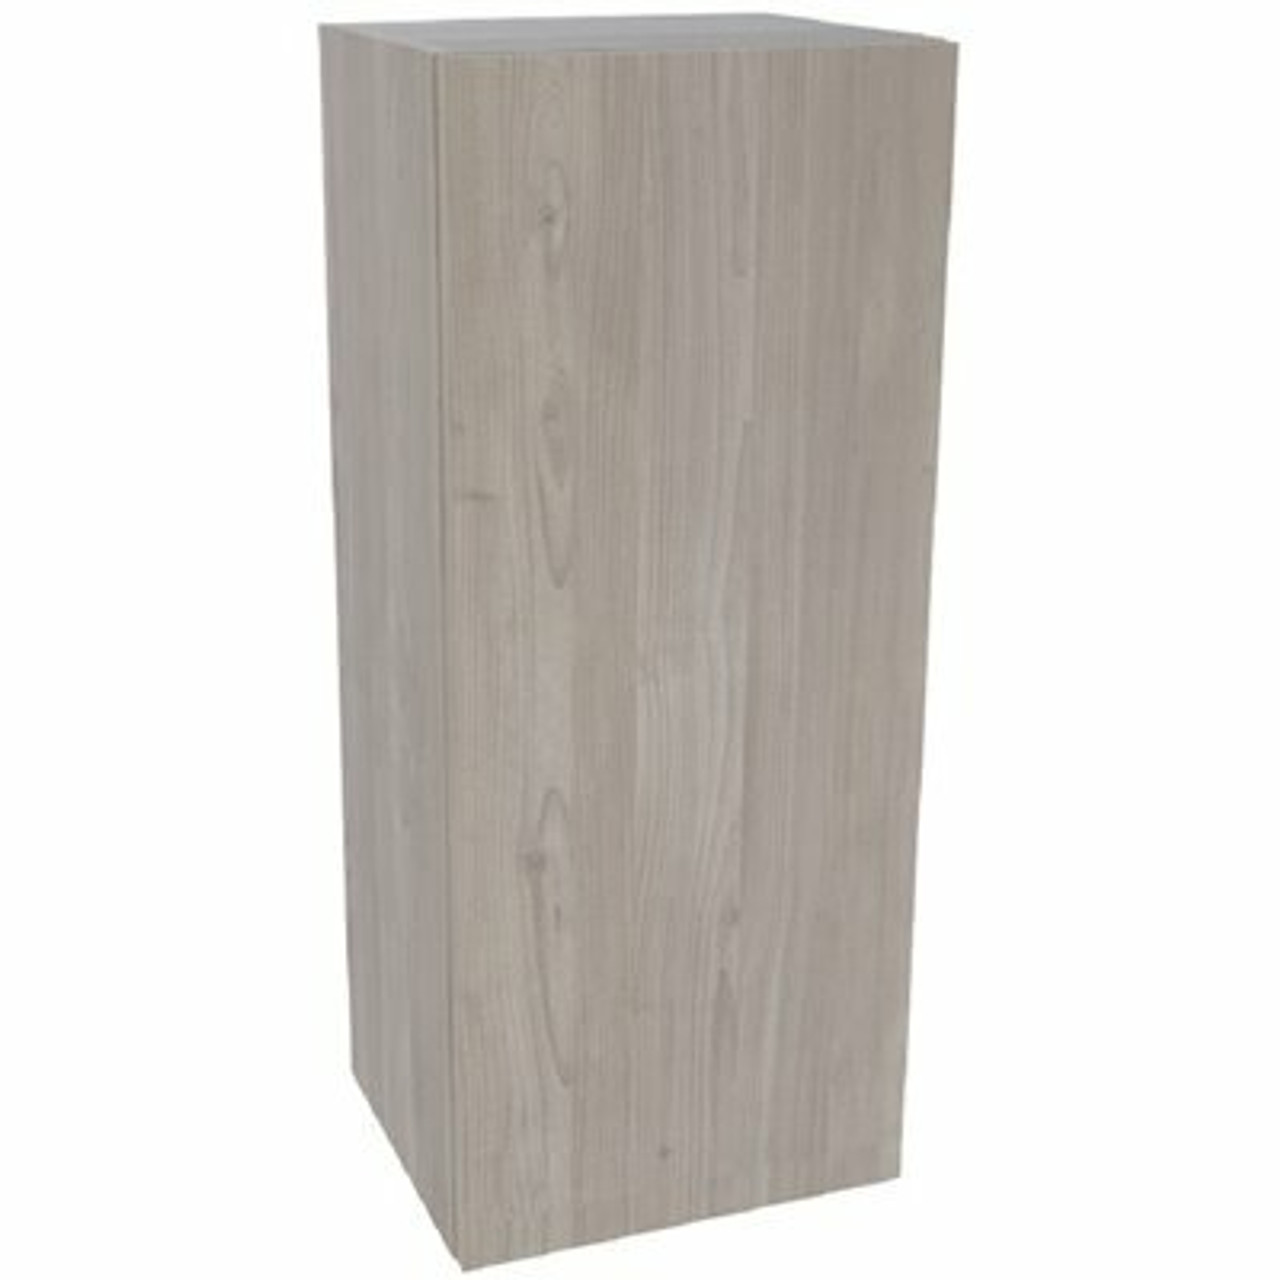 Cambridge Ready To Assemble Threespine 9 In. X 36 In. X 12 In. Stock Wall Cabinet In Grey Nordic